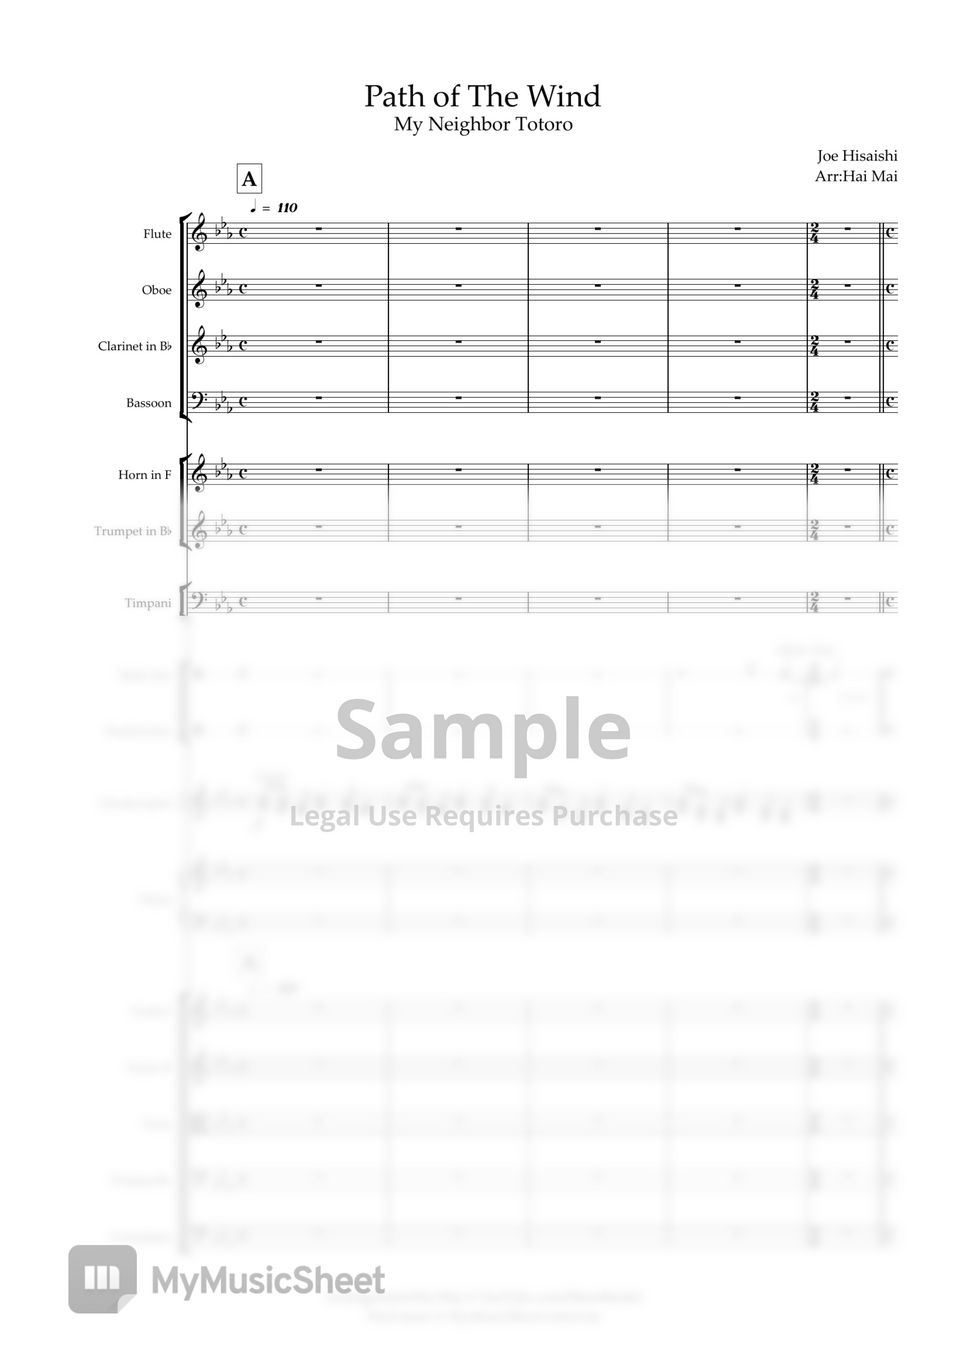 Joe Hisaishi - Path of The Wind(My Neighbor Totoro) for Orchestra - Score and Part by Hai Mai